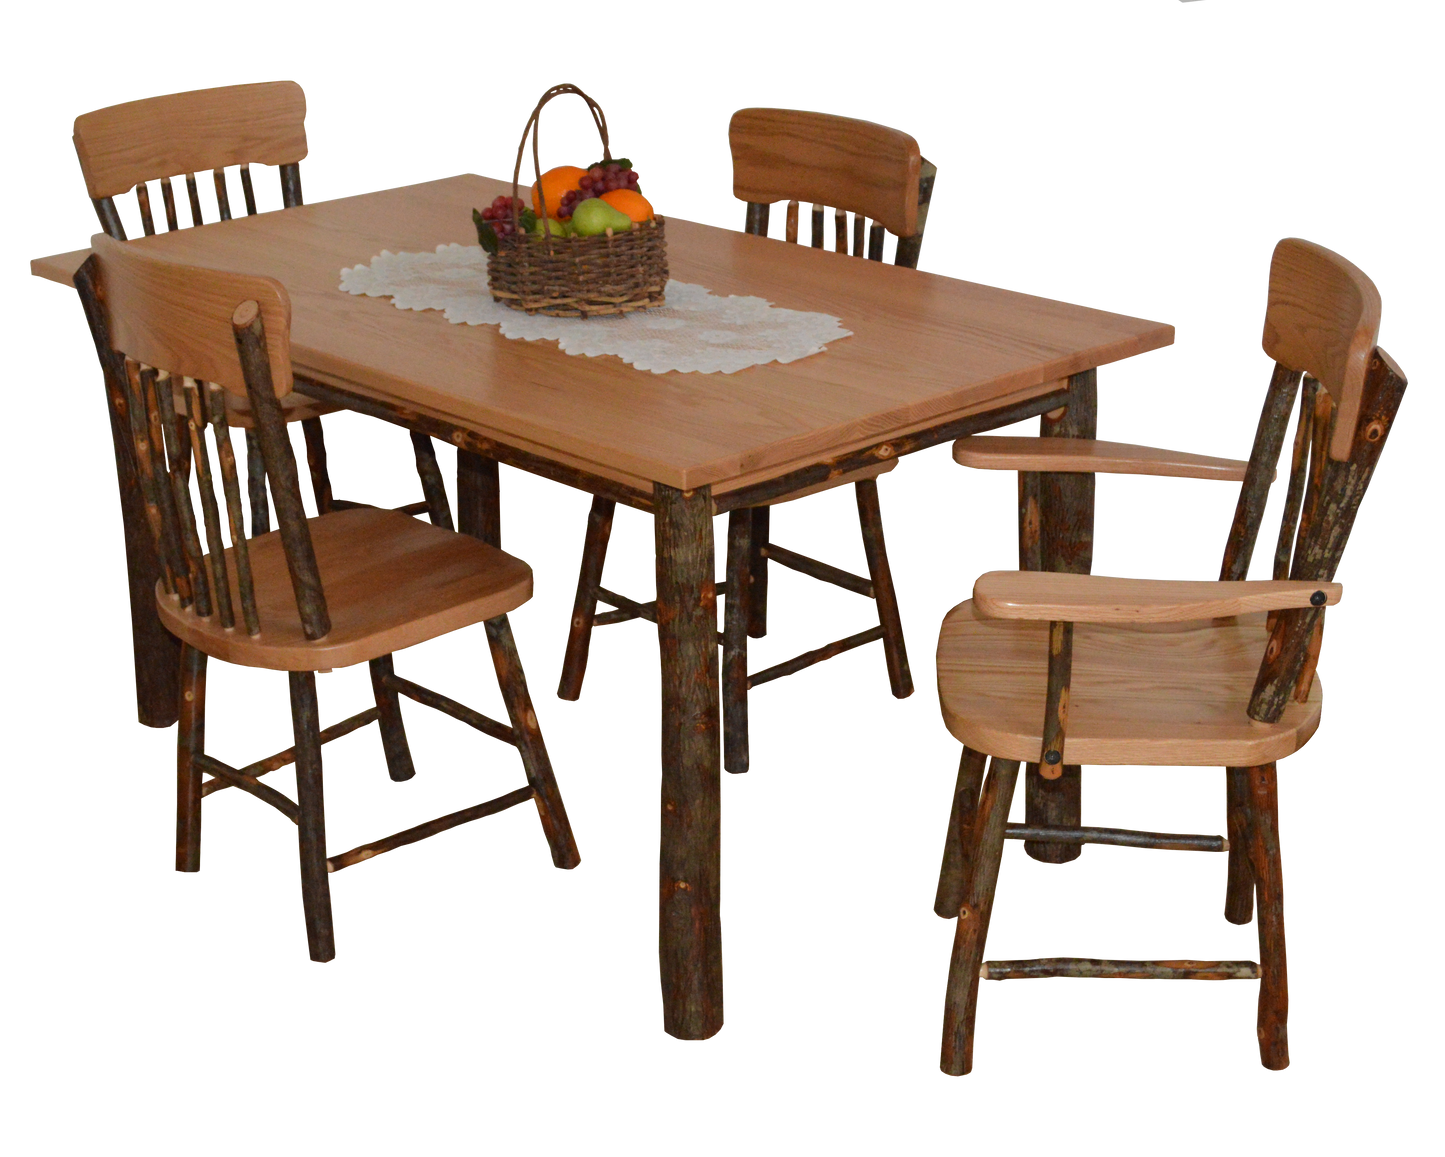 A&L Furniture Co. Hickory 5 Piece Farm Table Dining Set with 2 Side Chairs and 2 Arm Chairs - LEAD TIME TO SHIP 10 BUSINESS DAYS